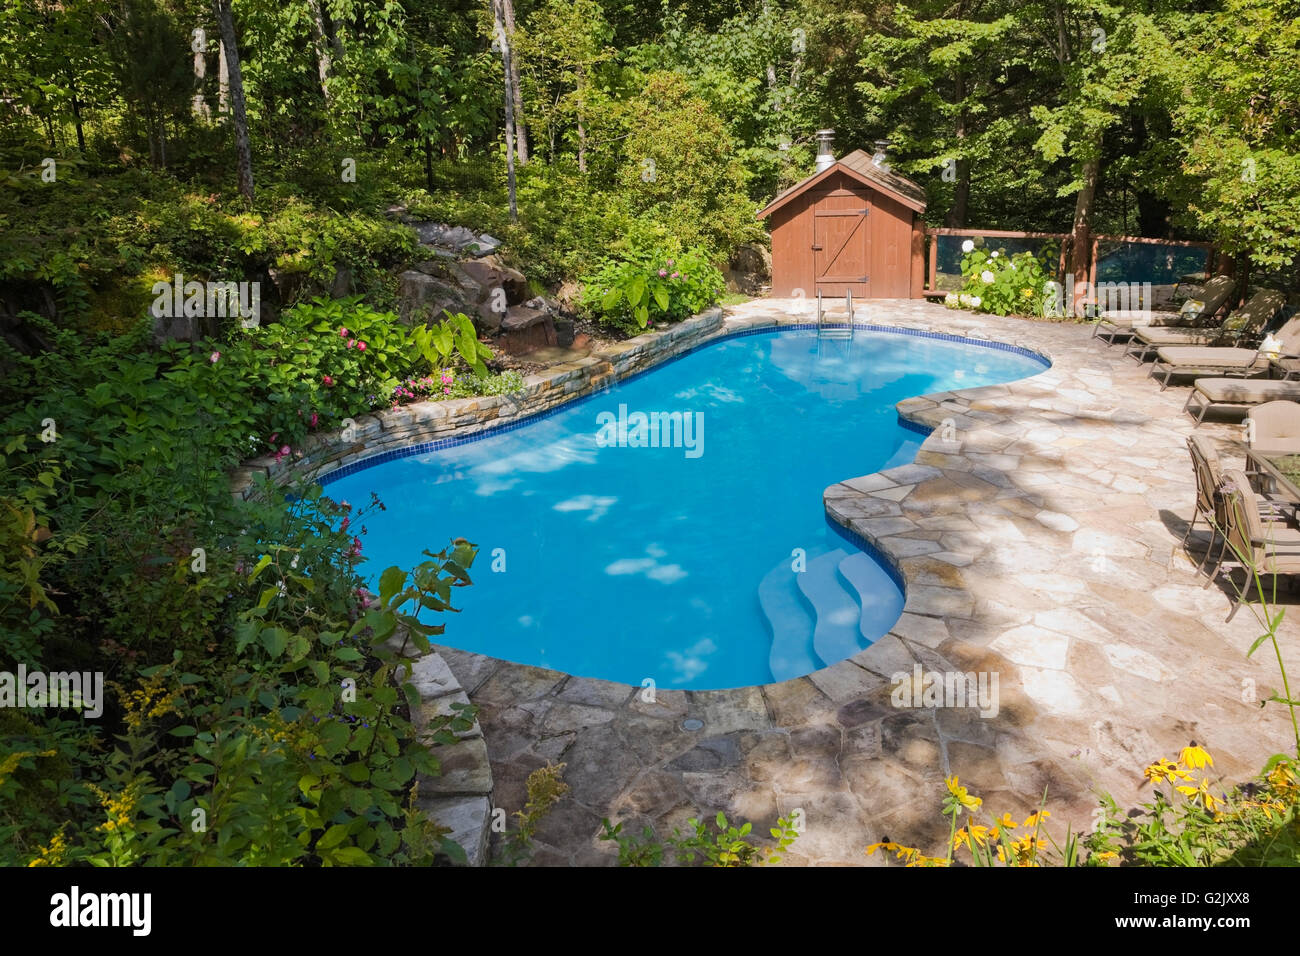 Inground swimming pool waterfall flagstone decking in landscaped backyard in summer Quebec Canada This image property released Stock Photo